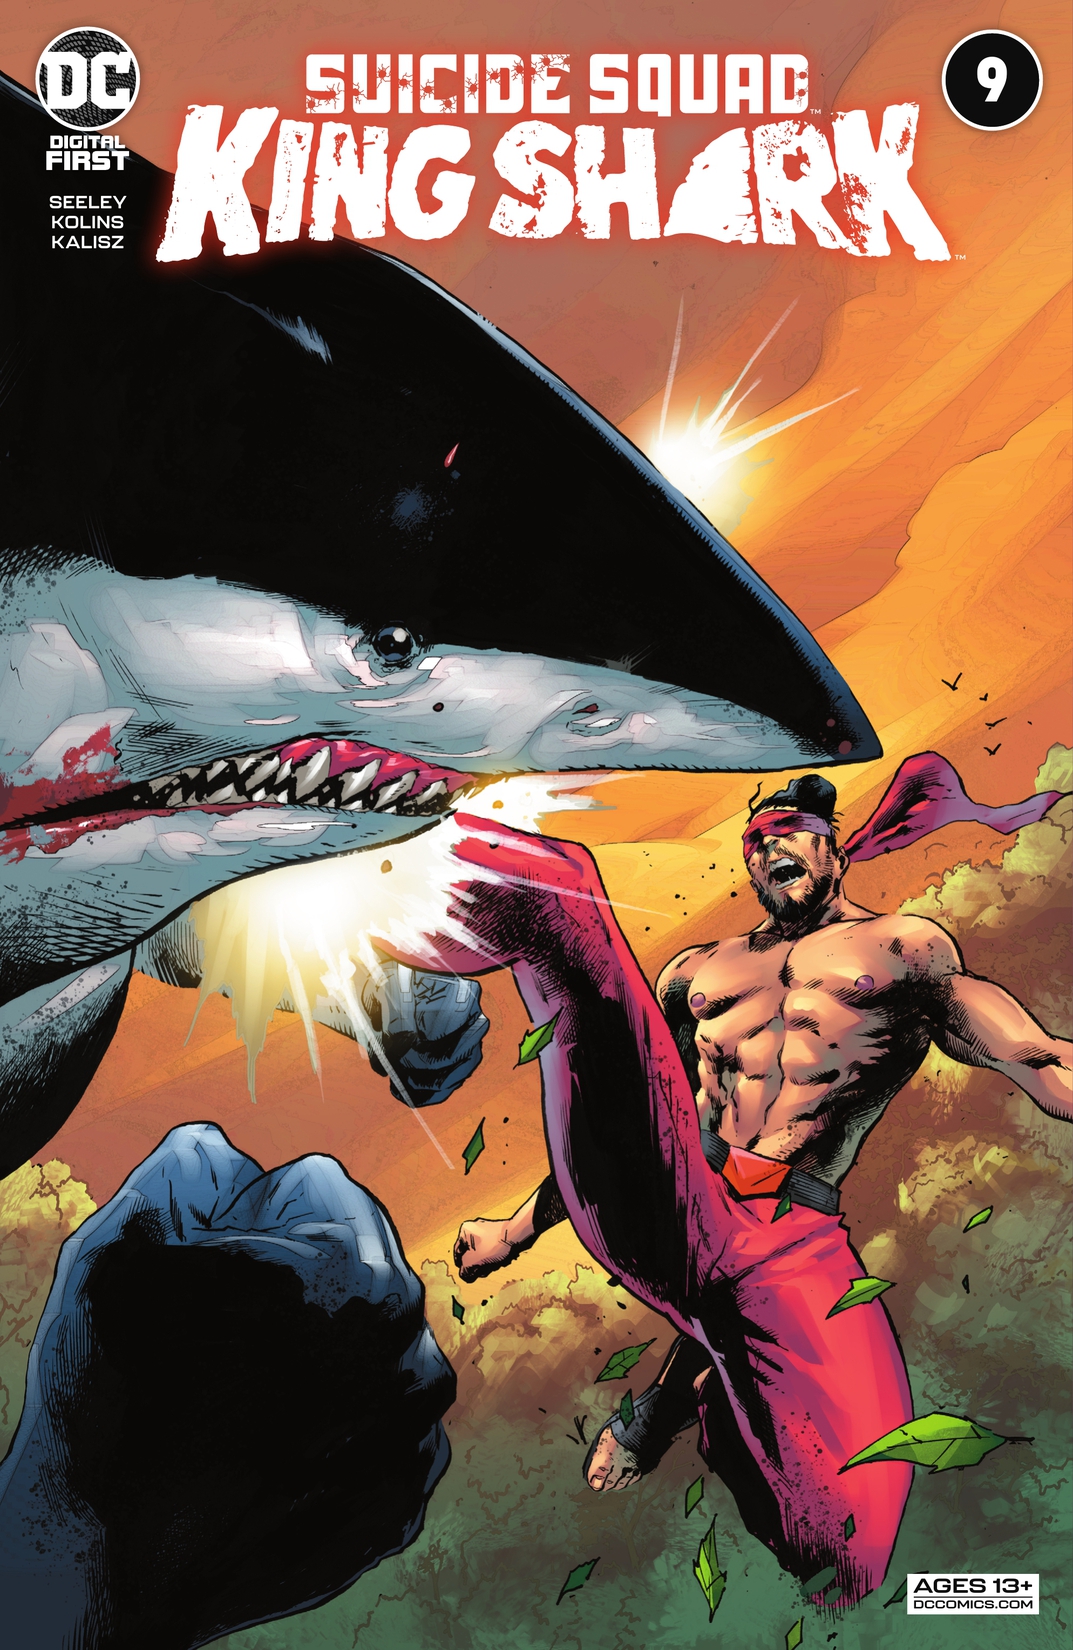 Suicide Squad: King Shark #9 preview images